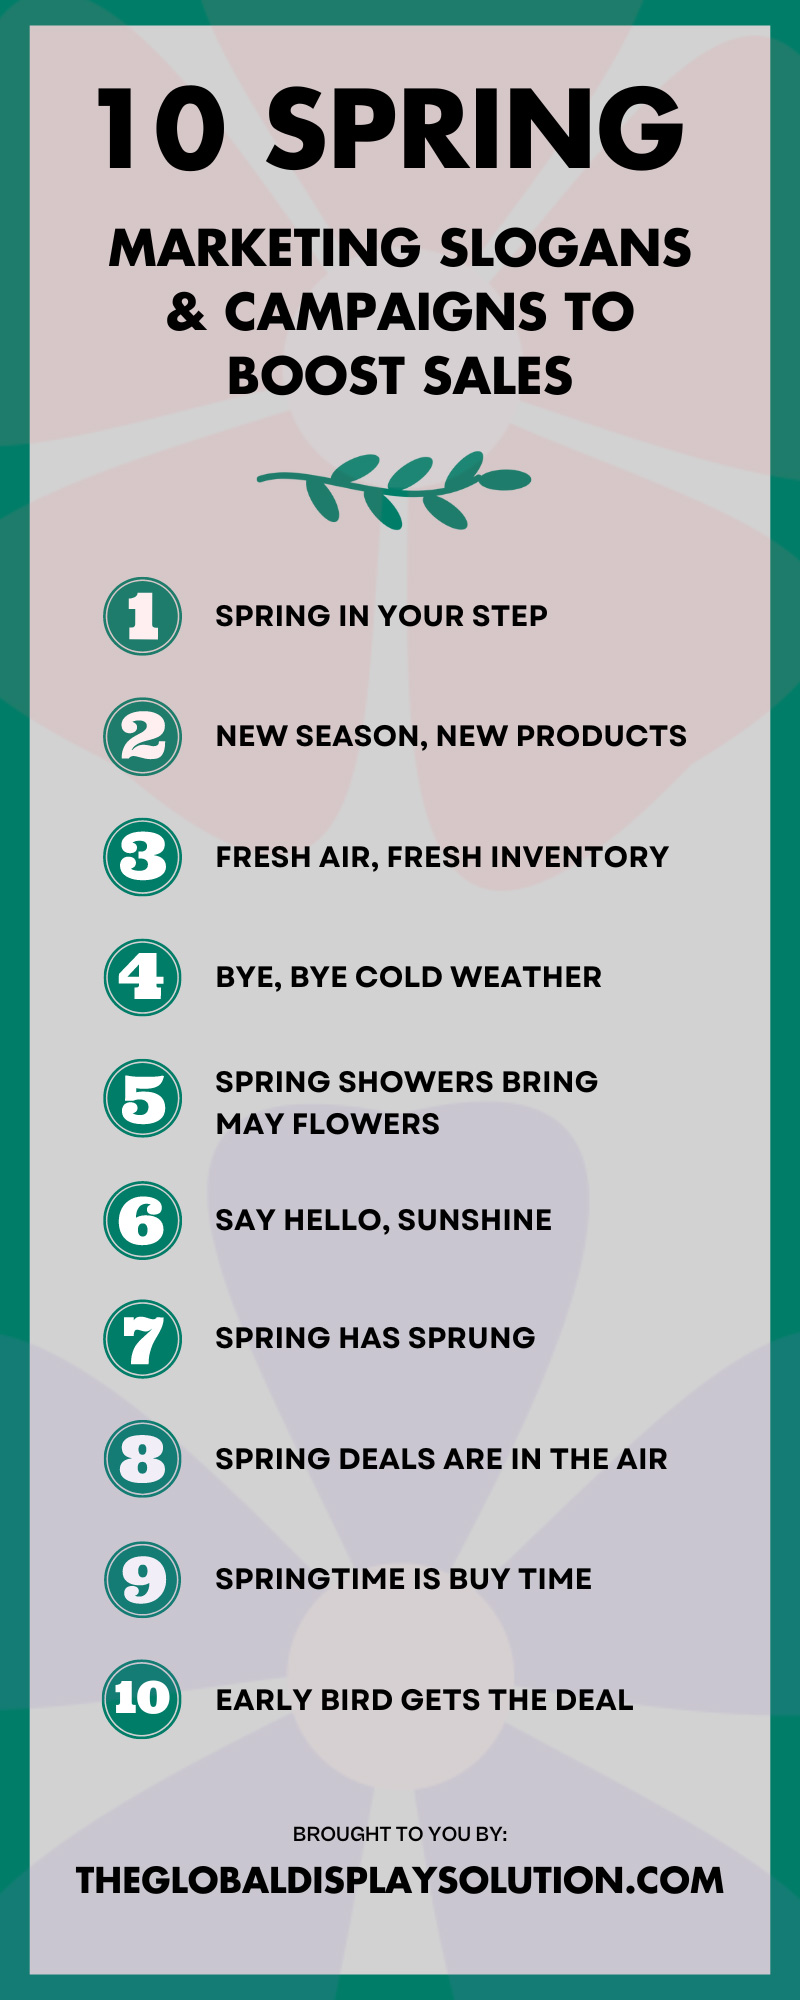 10 Spring Marketing Slogans & Campaigns To Boost Sales